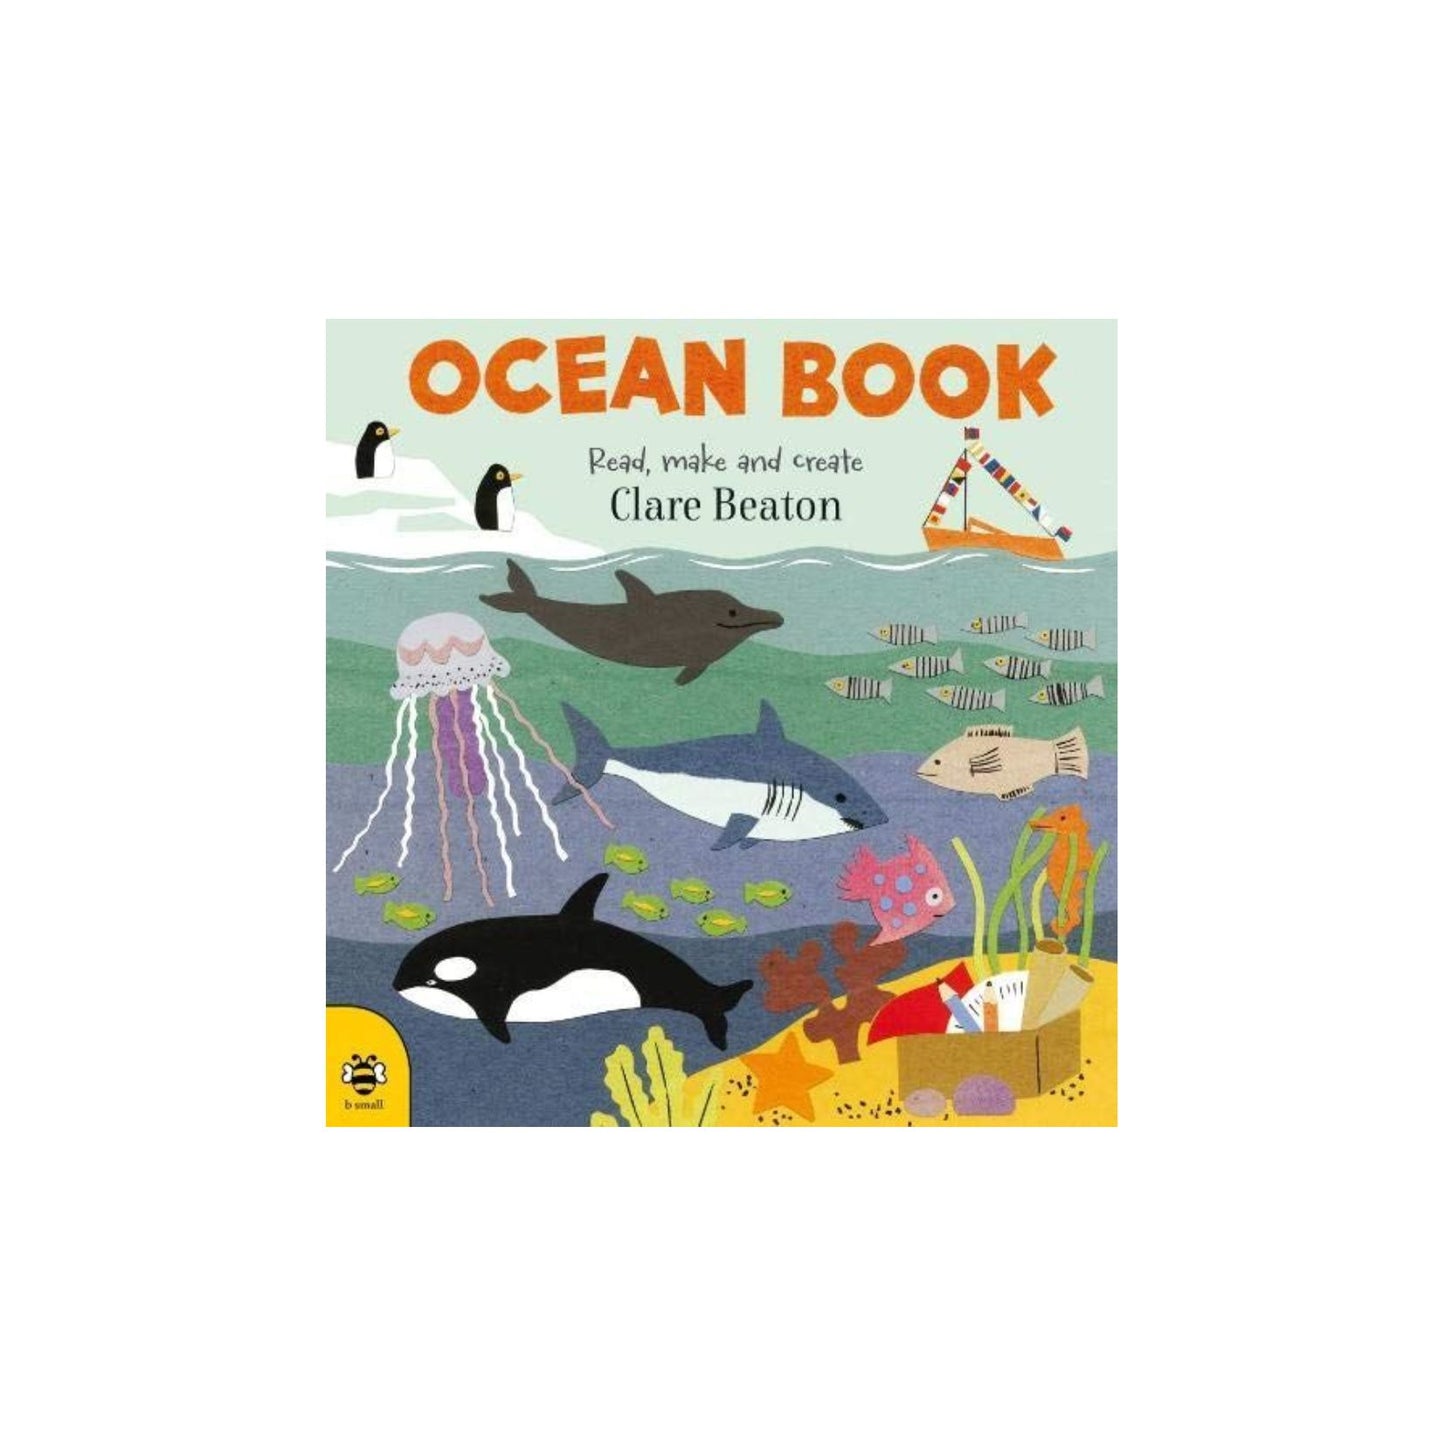 OCEAN BOOK: Read, Make and Create by Clare Beaton